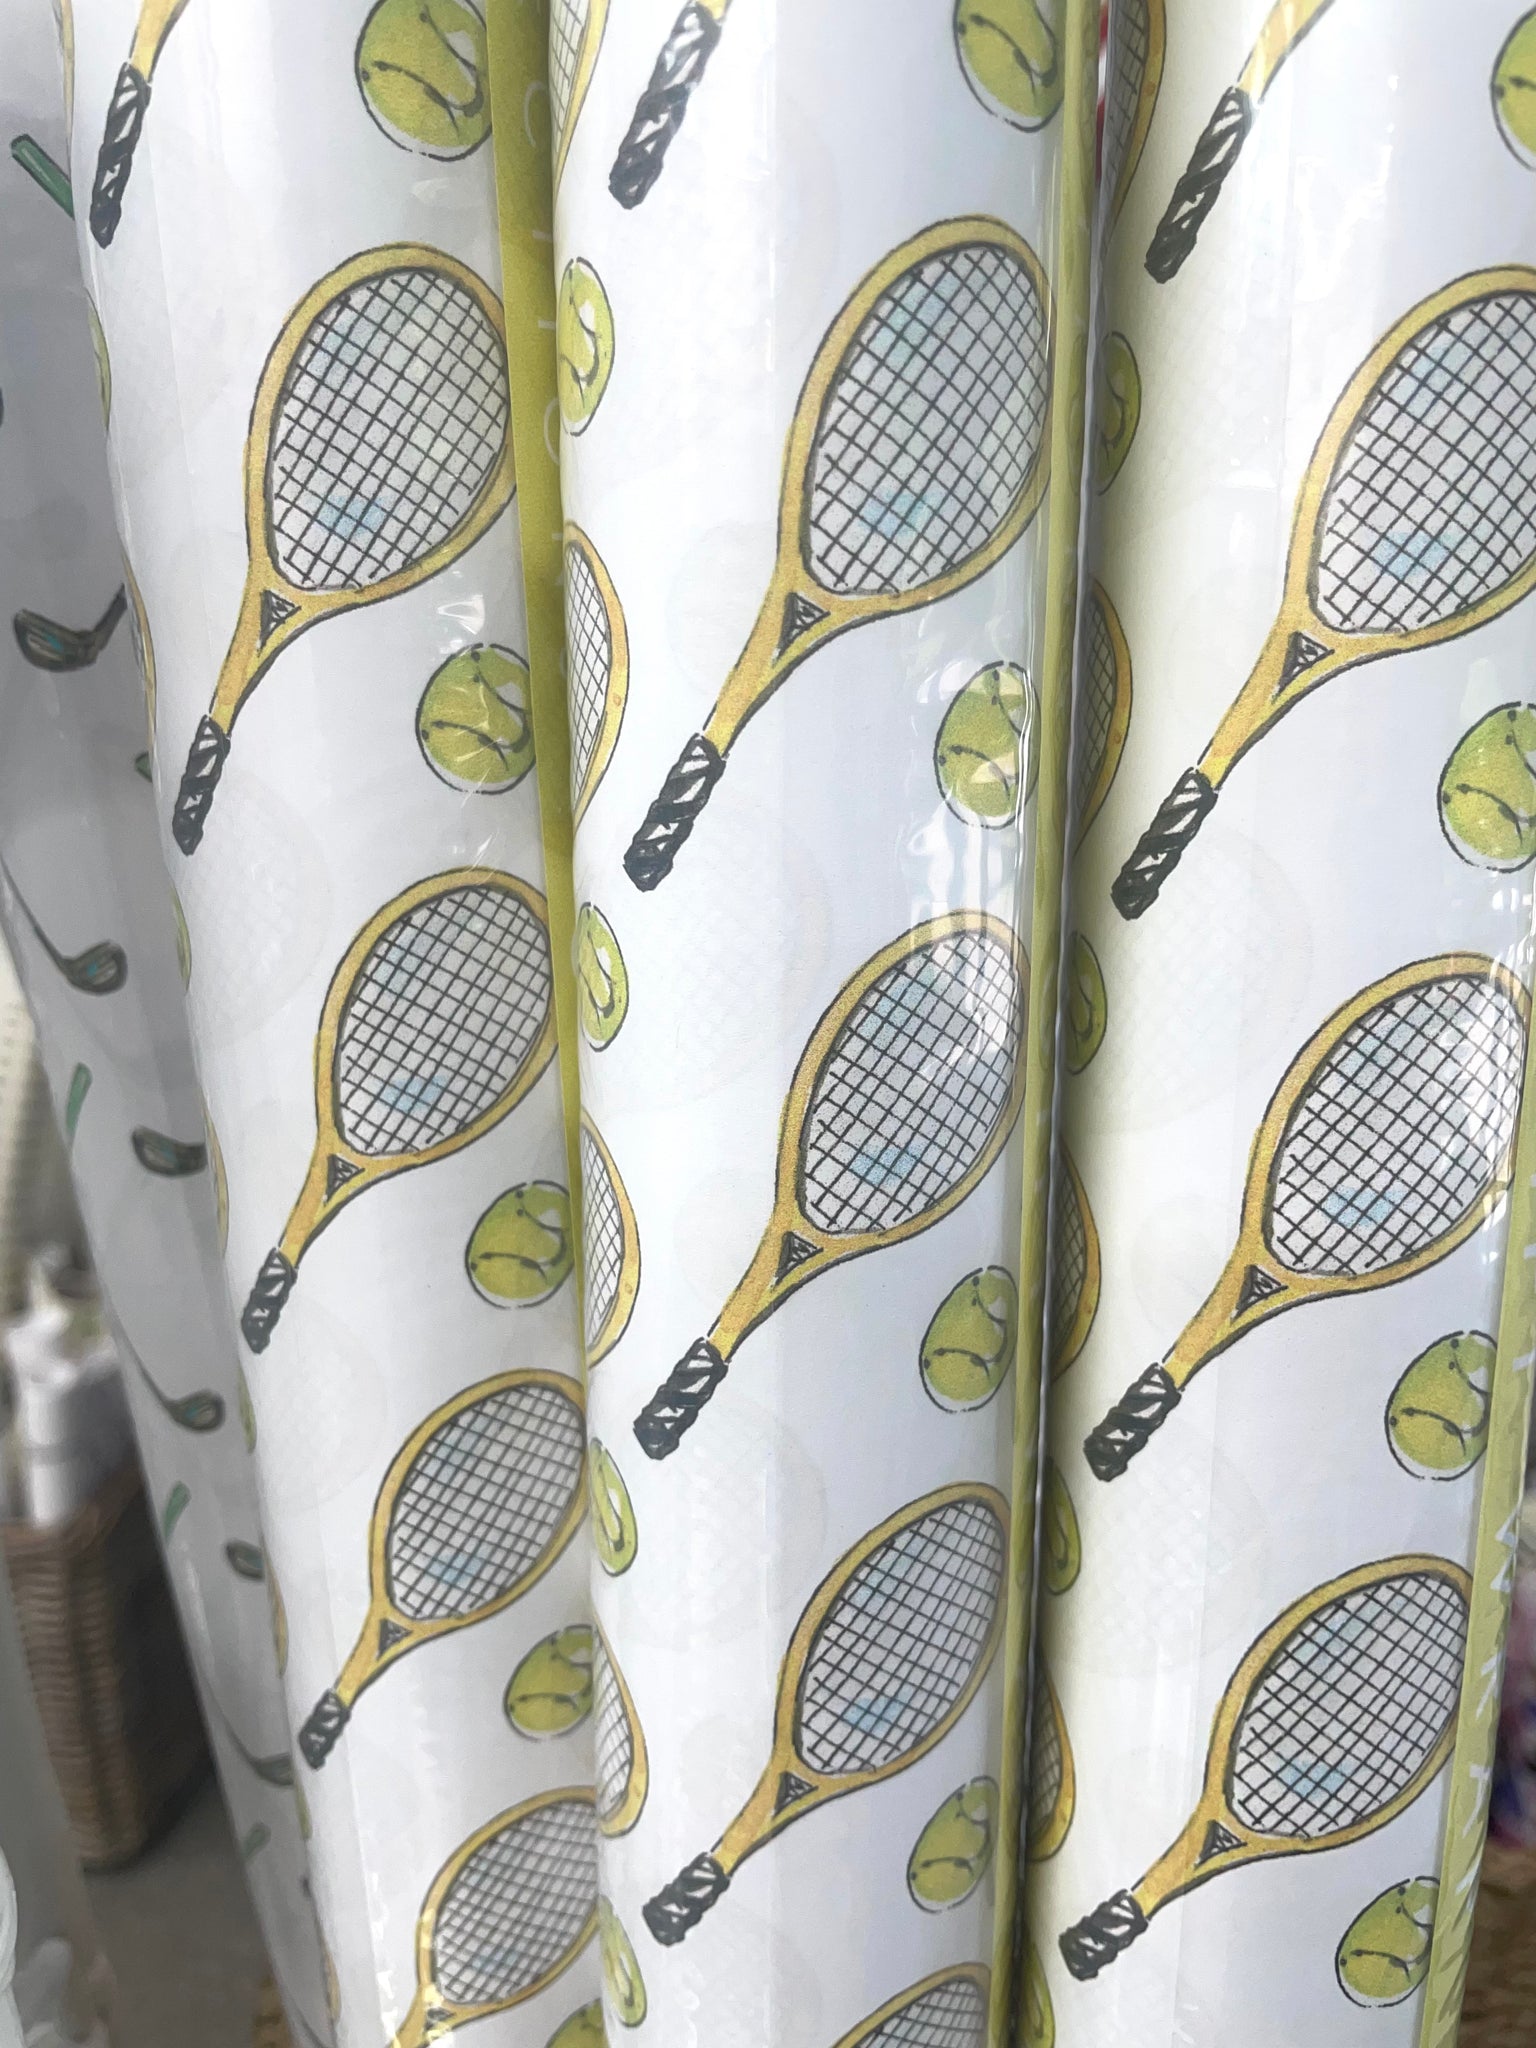 Tennis Rackets & Balls Handpainted Wrapping Paper